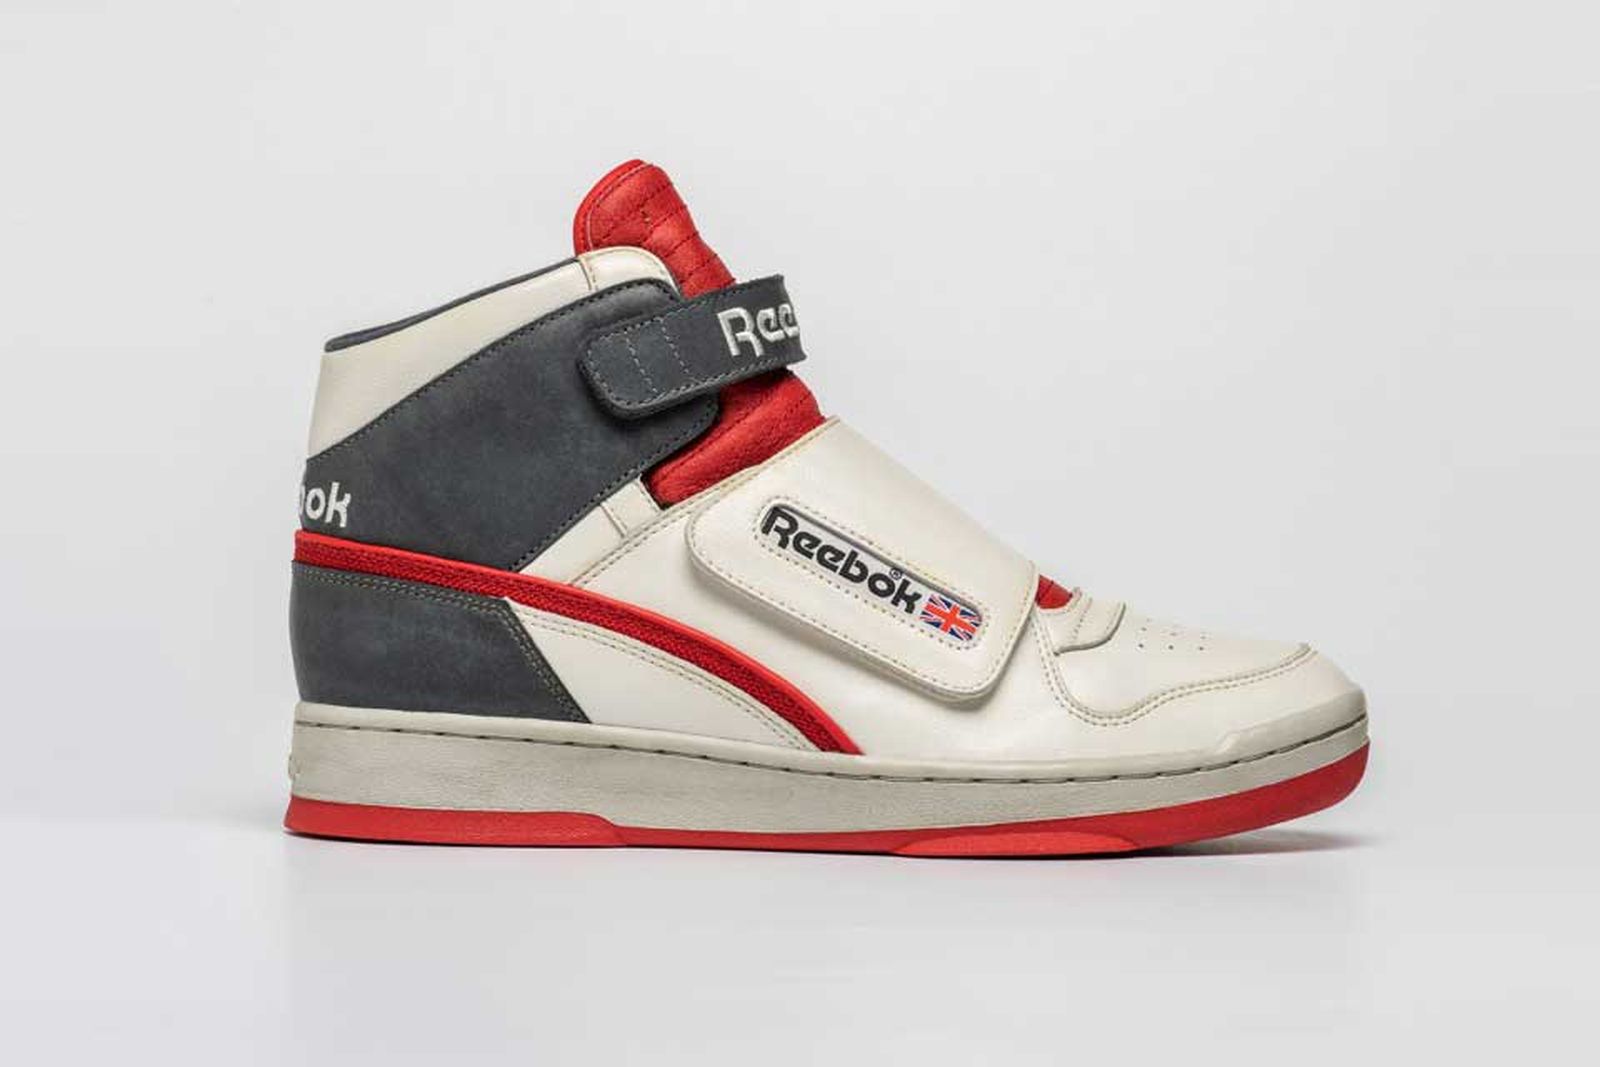 wireless See you tomorrow fake Reebok Alien Stomper 40th Anniversary: Release Date, Price & More